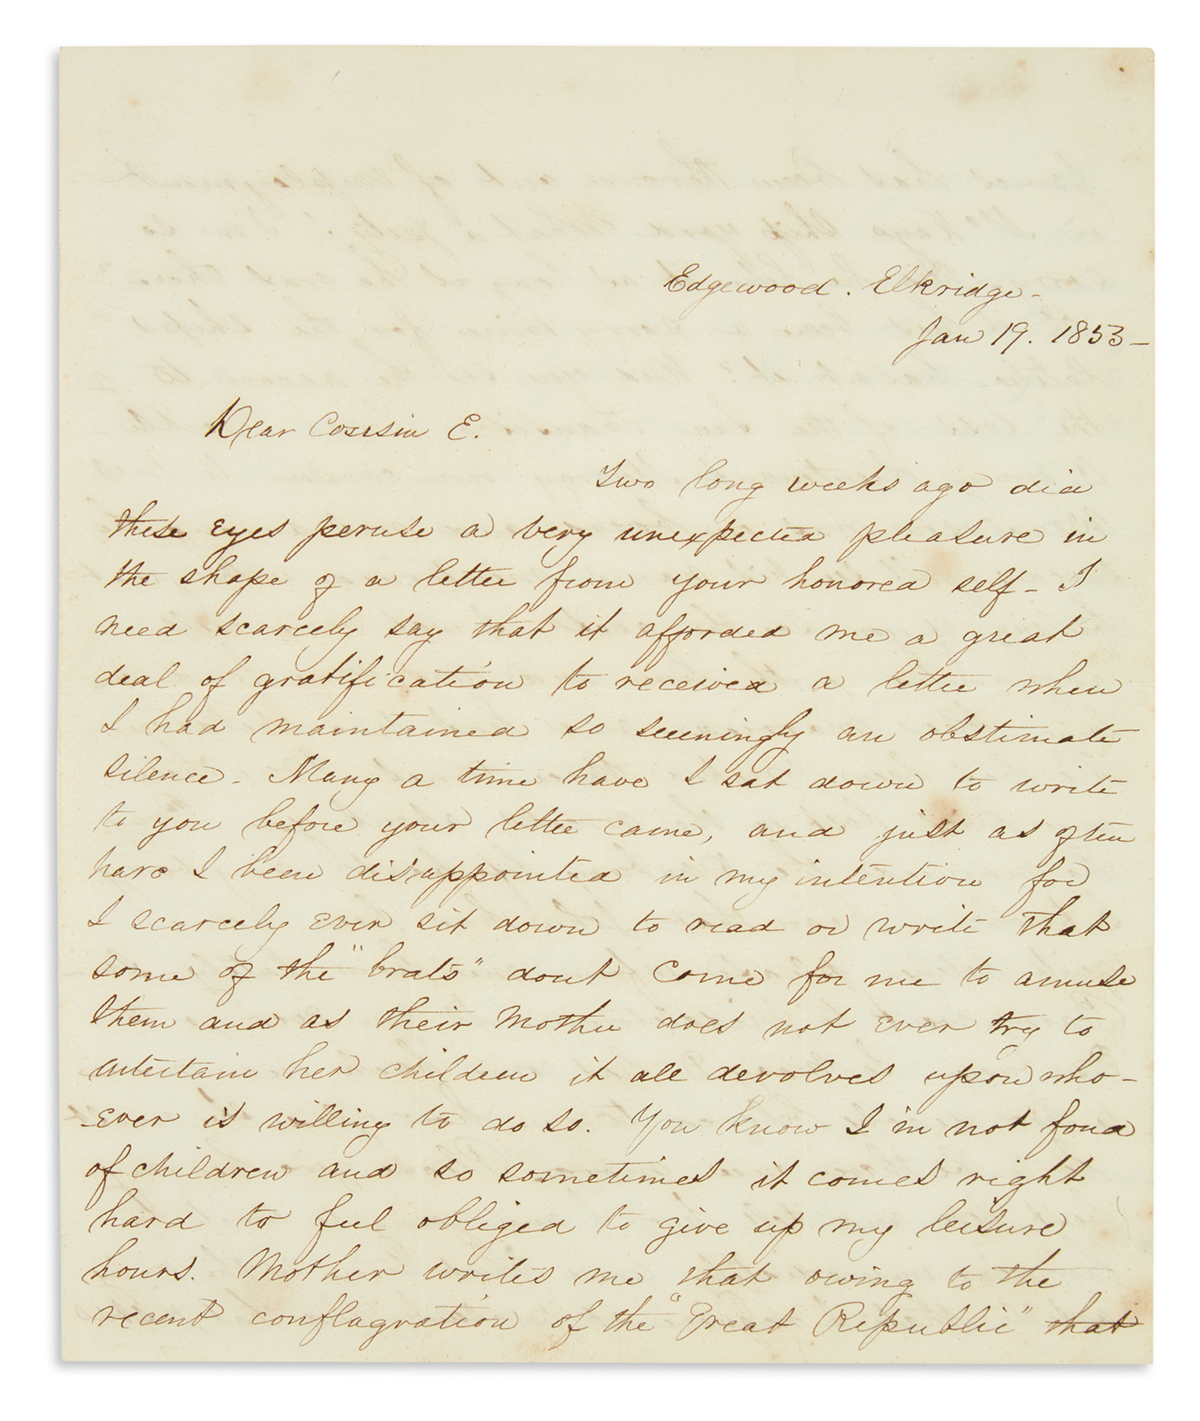 (SLAVERY AND ABOLITION.) Letter describing the resistance of a Maryland house slave.